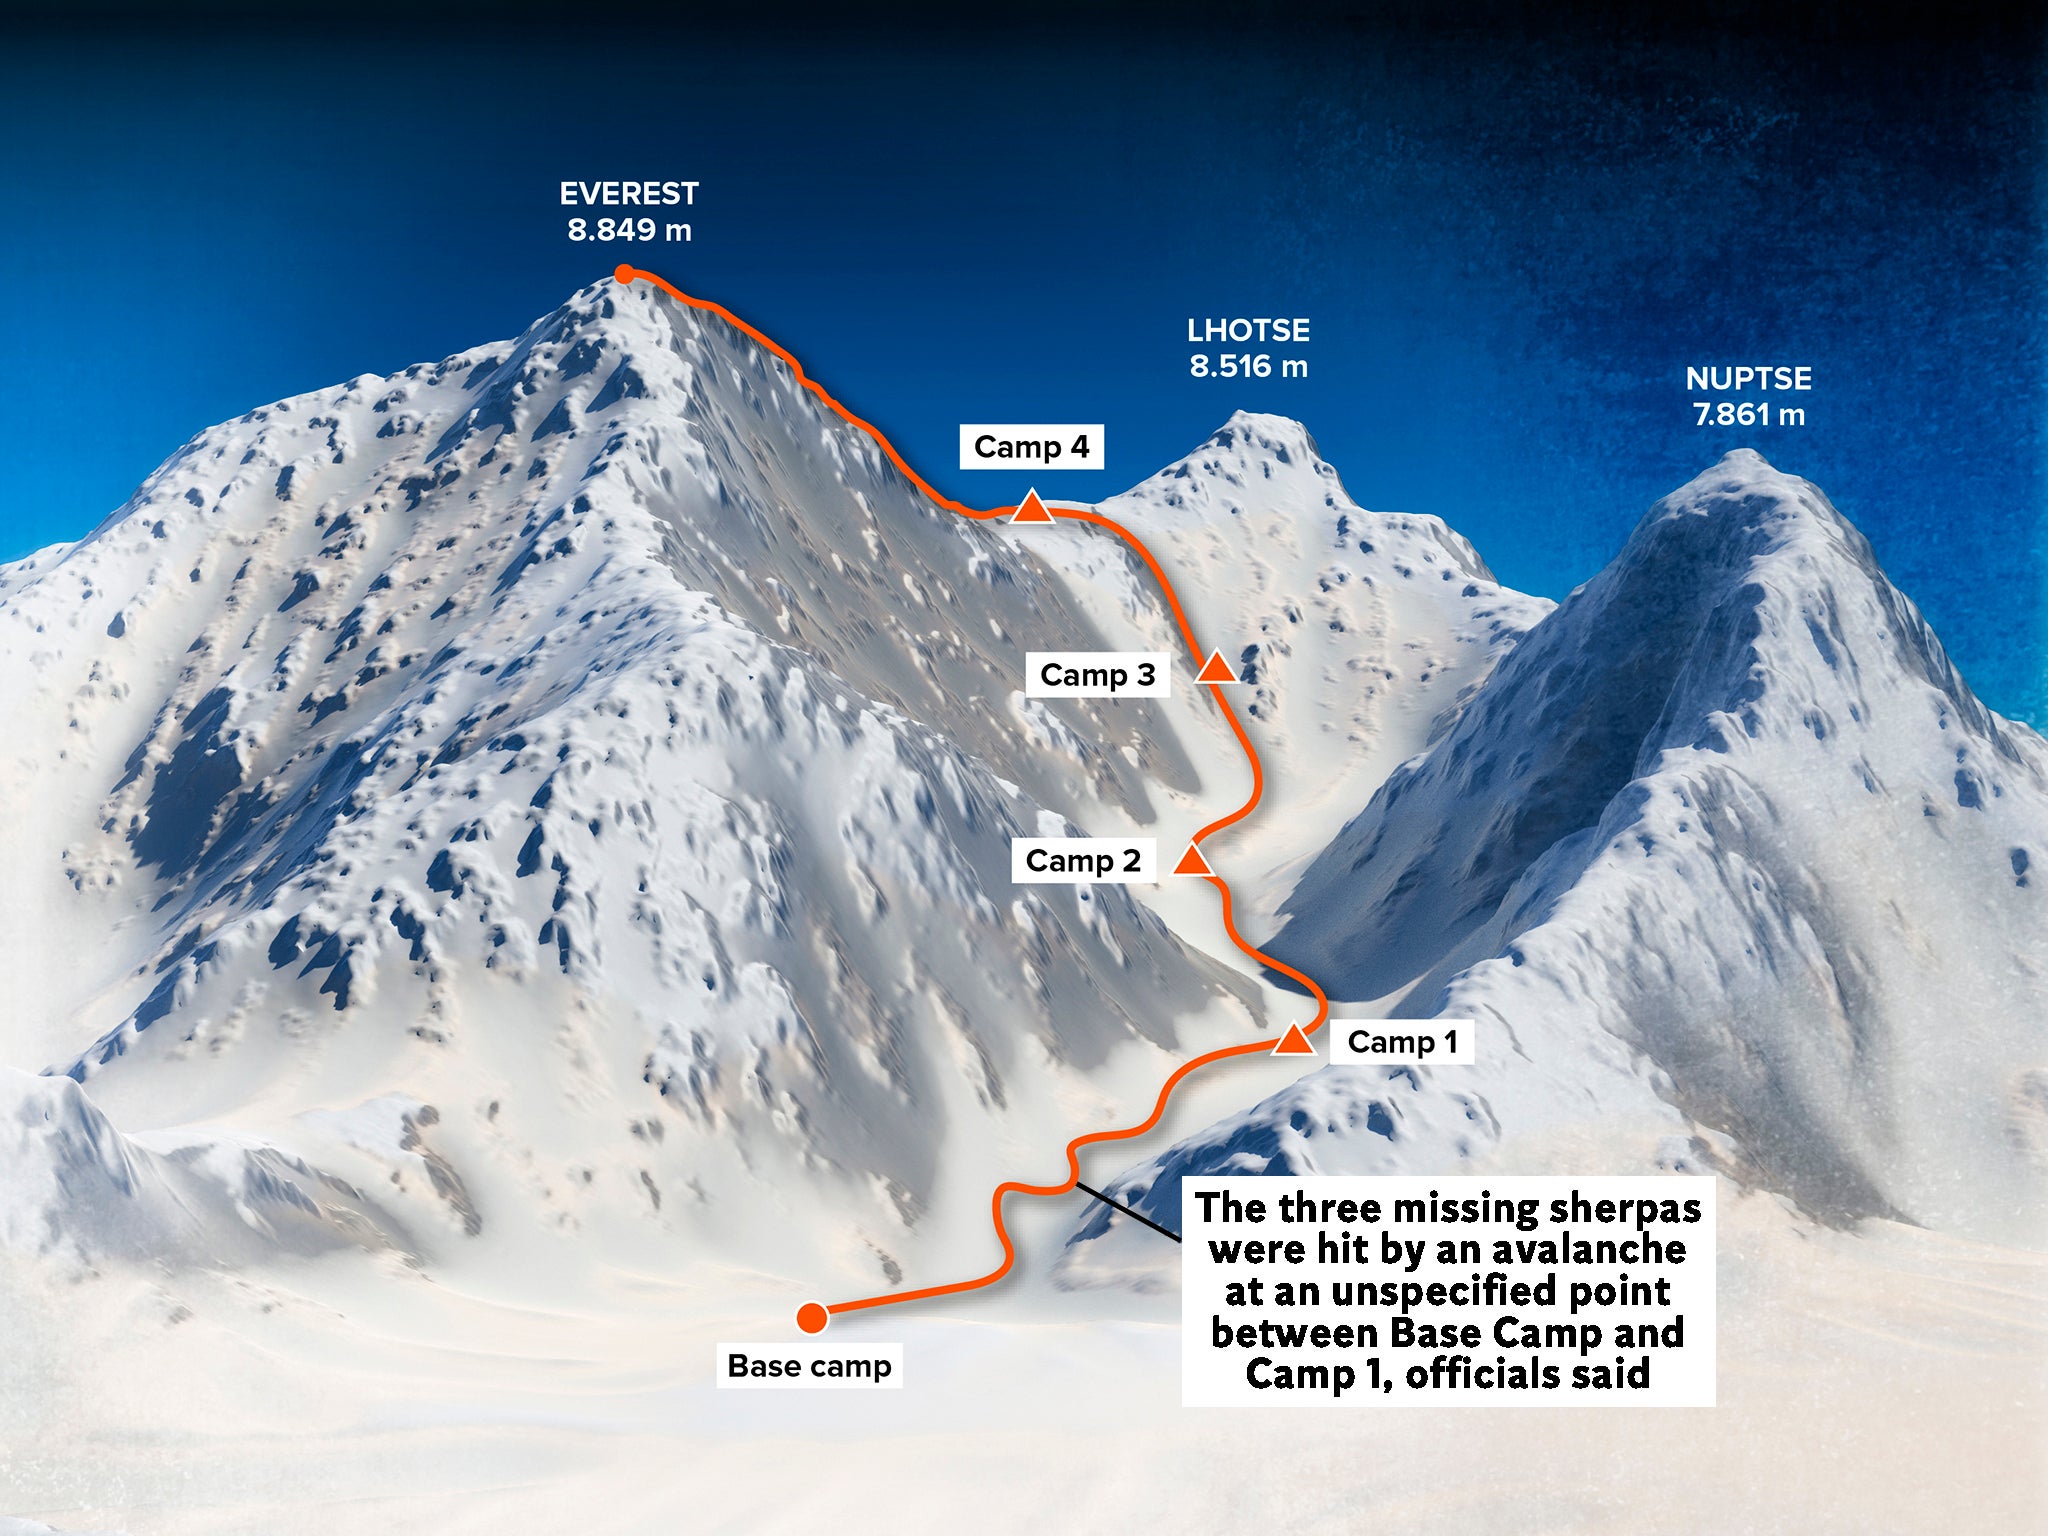 Base camp and path to climb to the top of Mount Everest, relief height, mountains. Lhotse, Nuptse